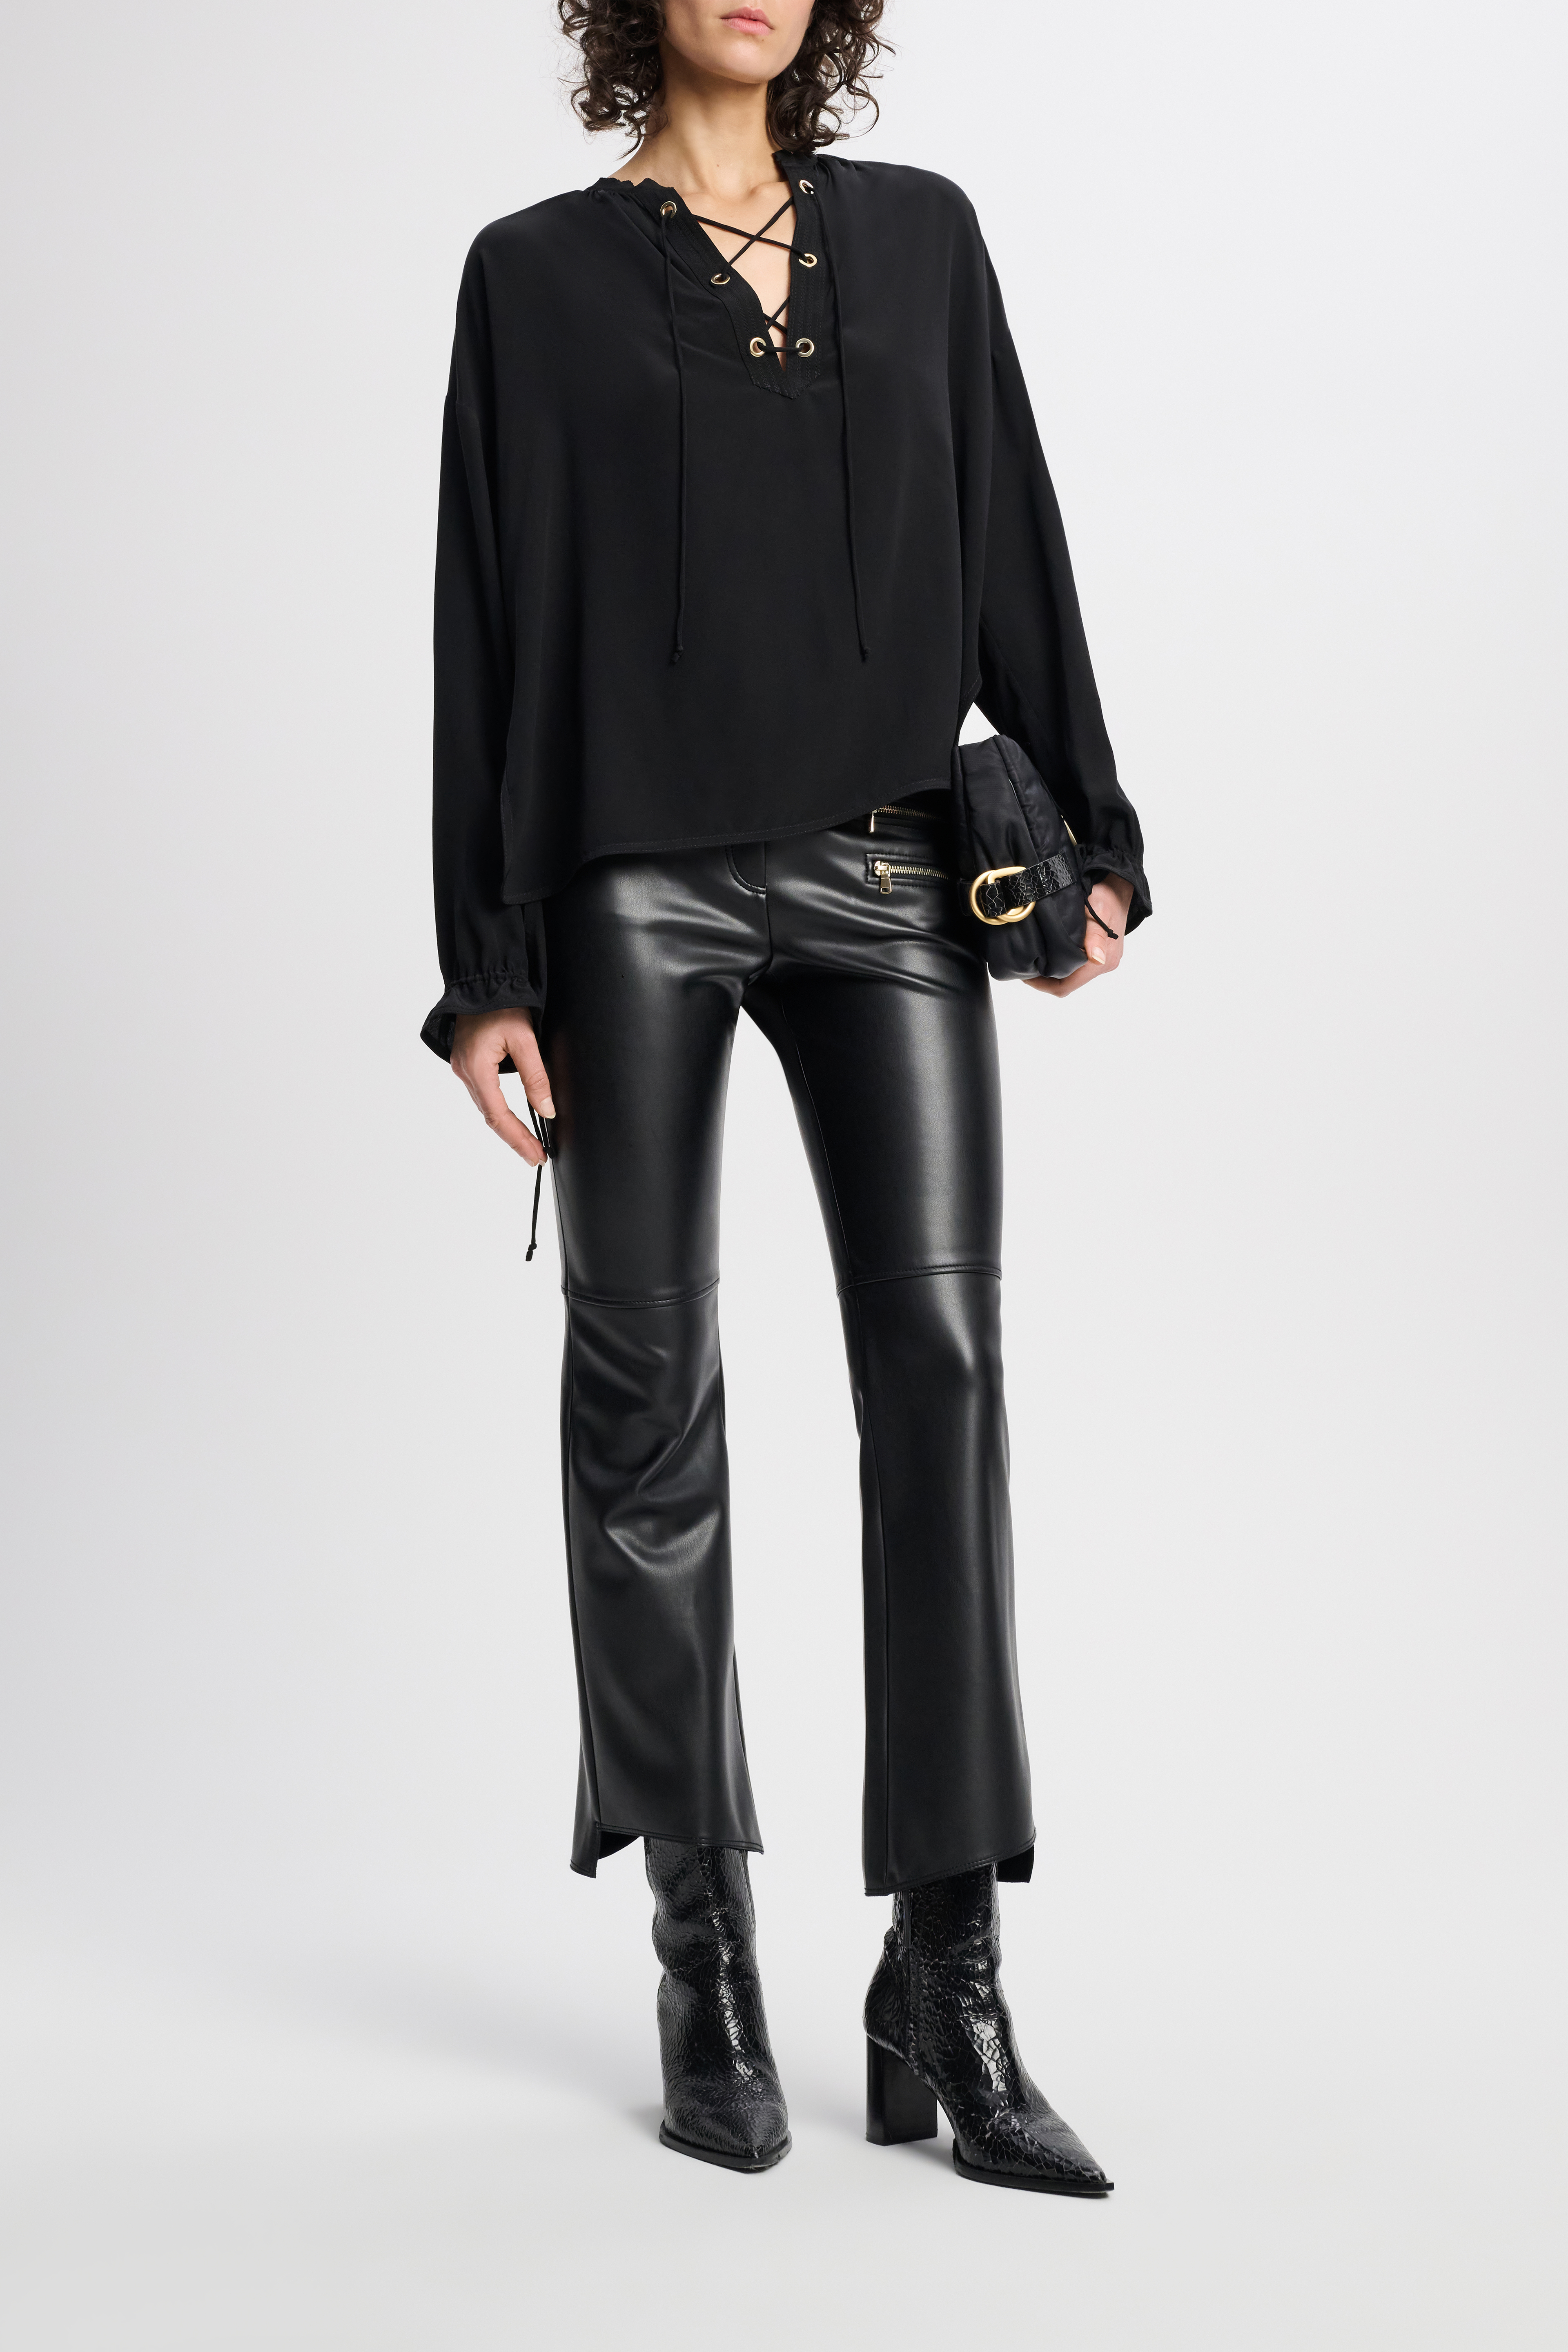 Dorothee Schumacher Silk blouse with laced